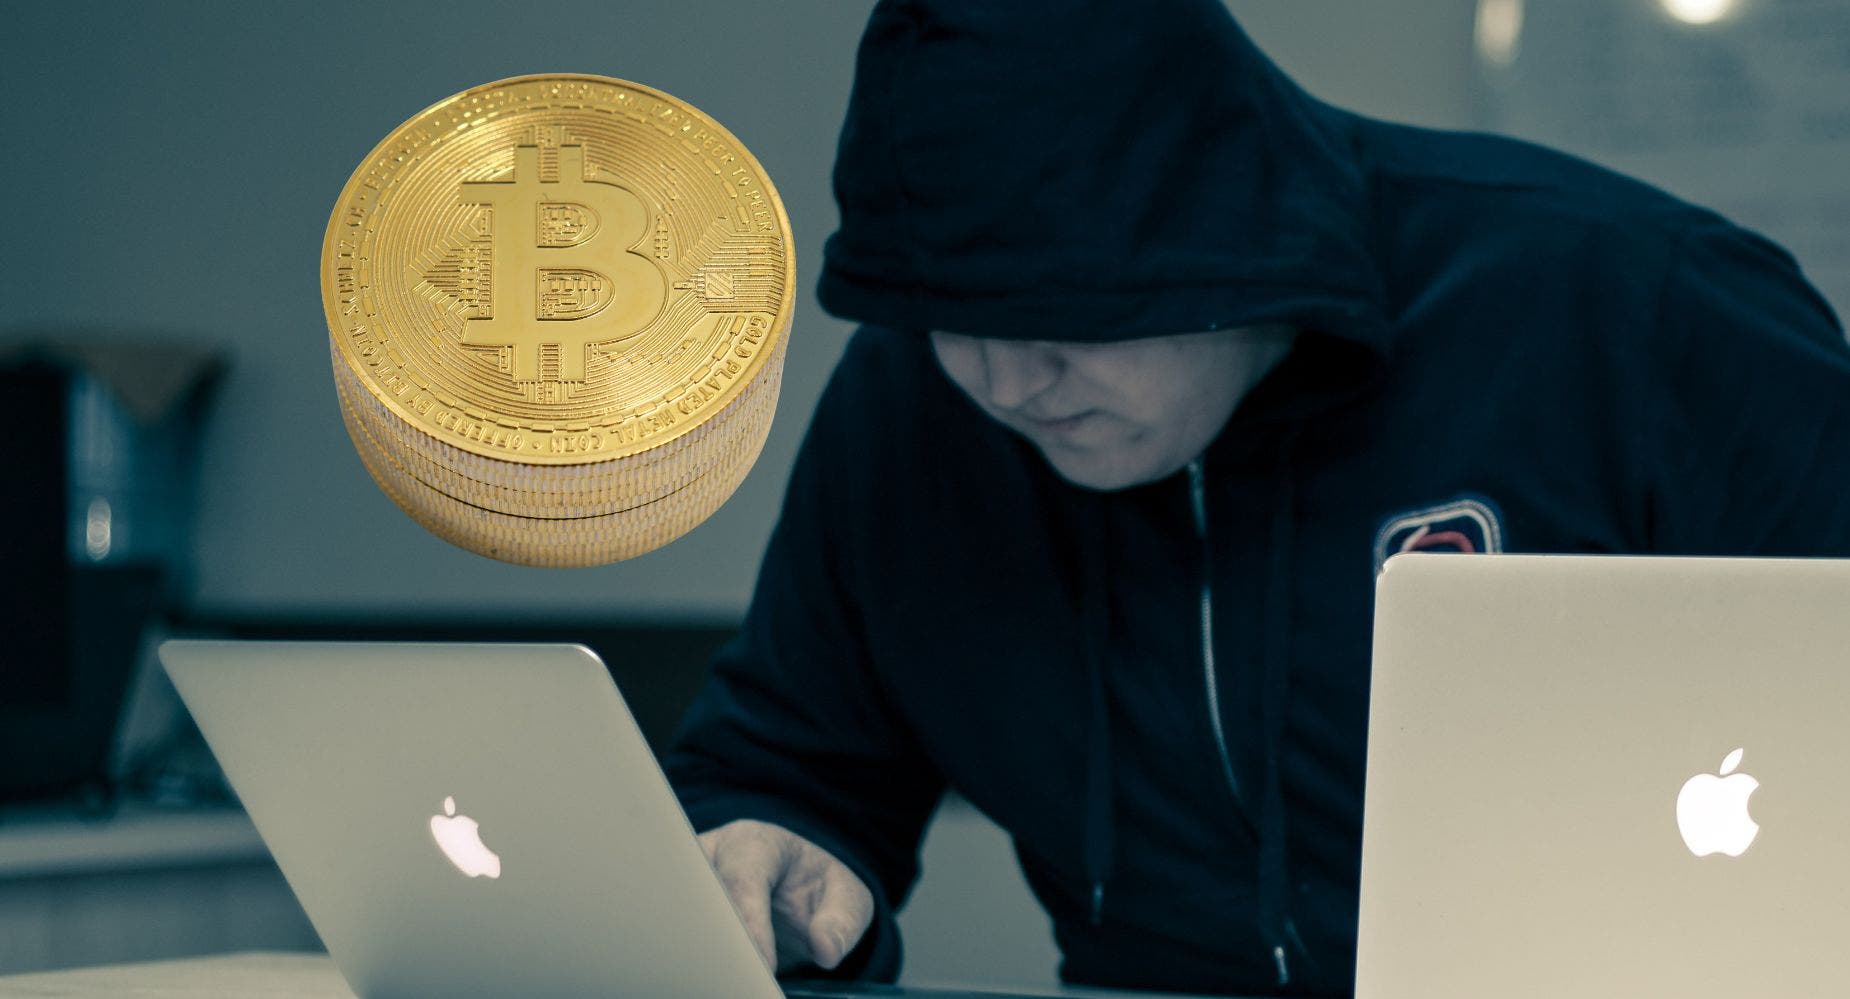 Doctor Paid $60,000 Worth Of Bitcoin To Kidnap His Wife; How He Tried To Remain Anonymous